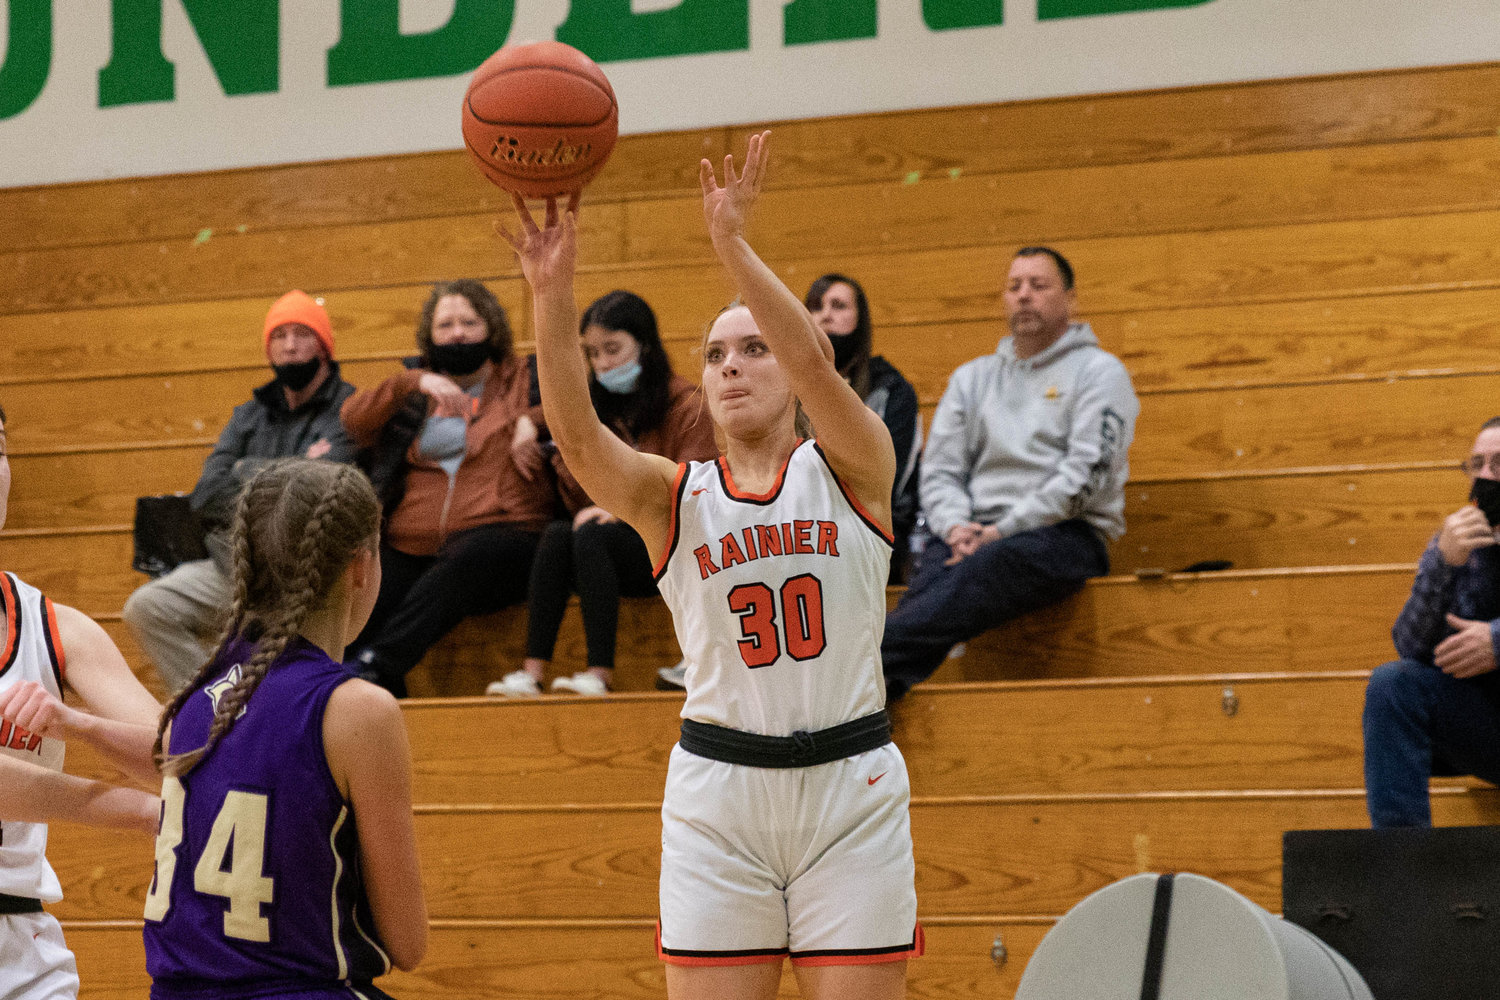 Rainier forward Isabella Holmes takes a 3-pointer against Columbia (Burbank) in the regional round of the state tournament at Tumwater Feb. 25.